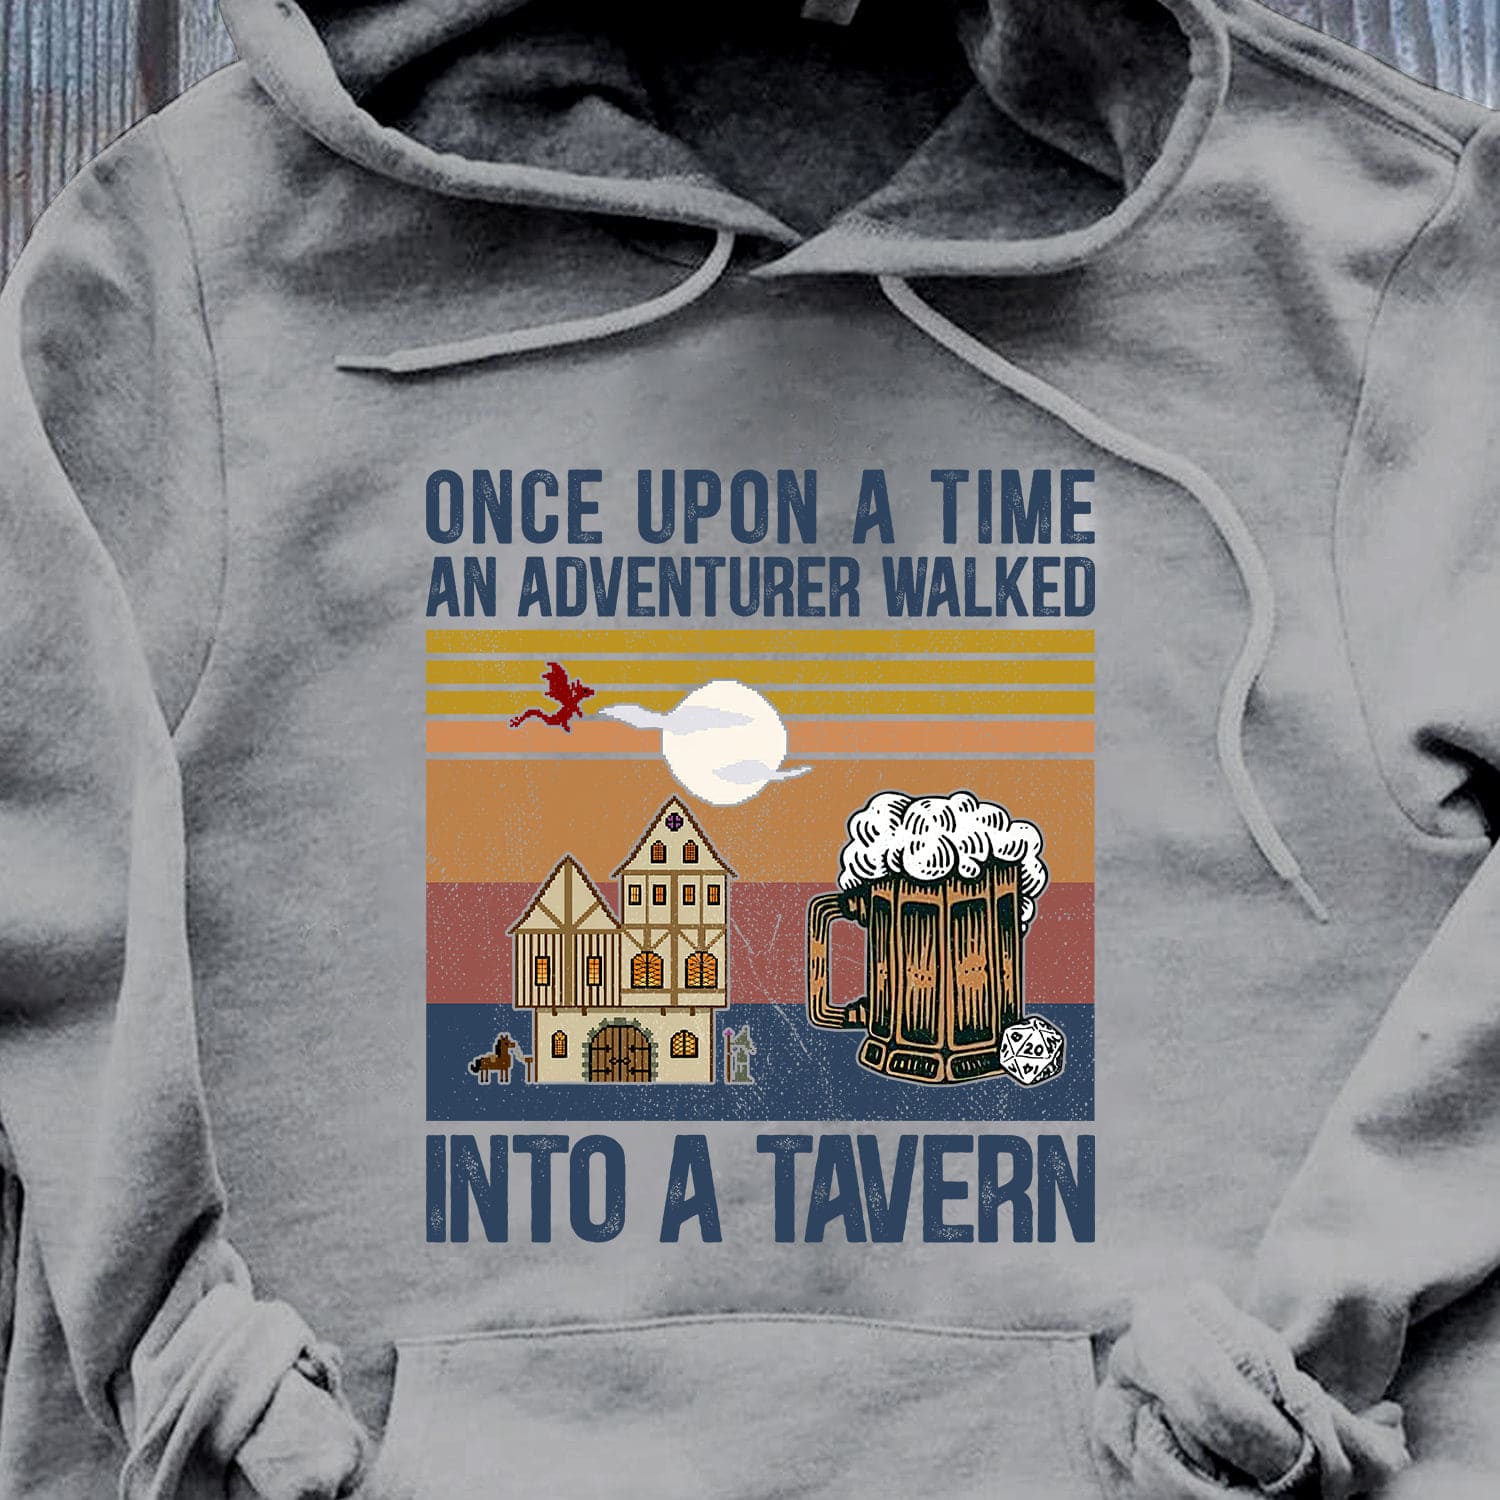 Dungeon And Dragon Beer - Once upon a time an adventurer walked into a tavern